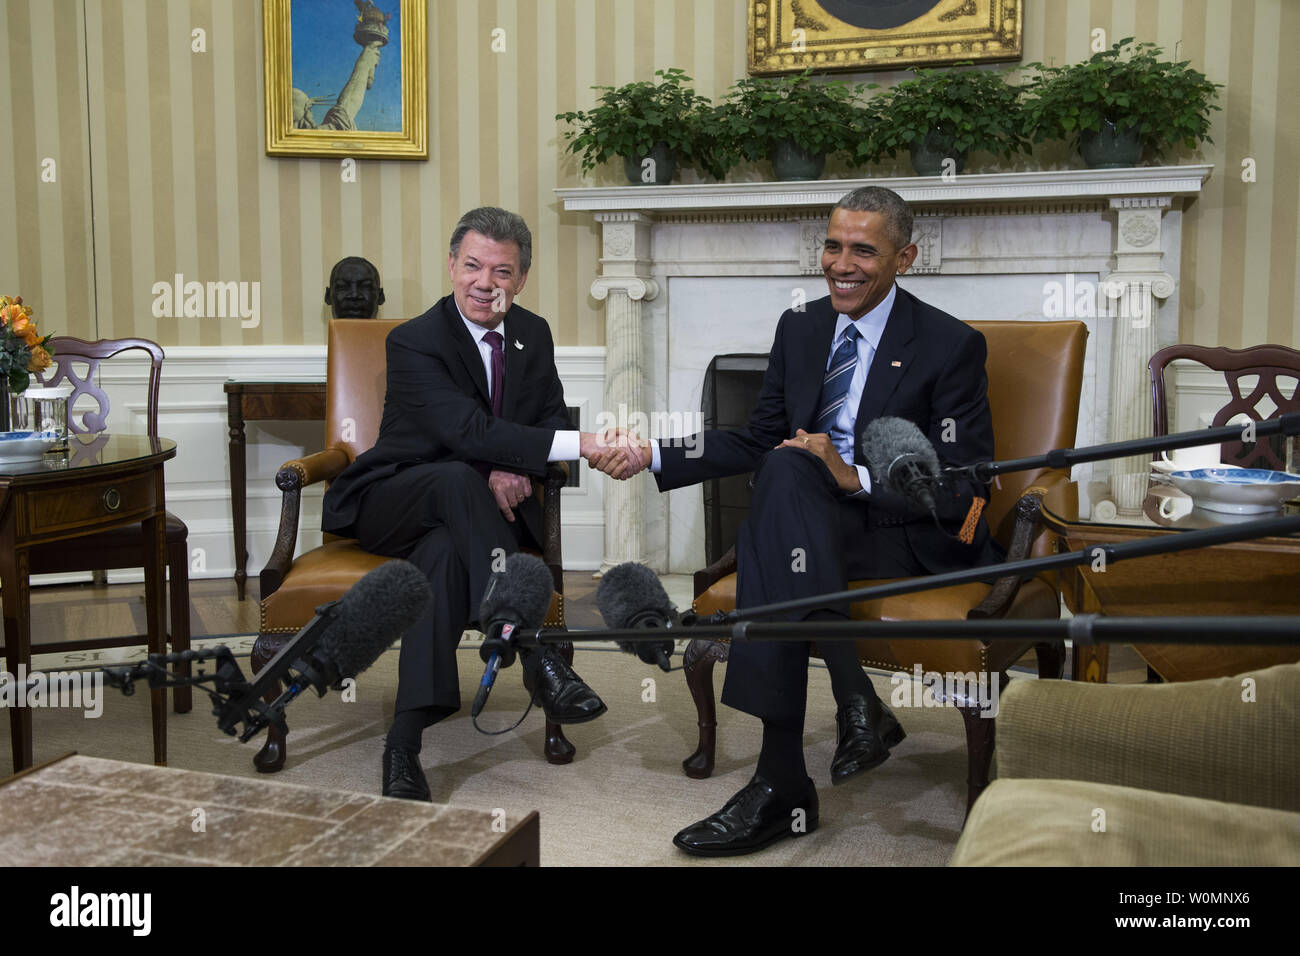 US President Barack Obama meets with the President of Colombia Juan Manuel Santos in the Oval Office of the White House in Washington, D.C., February 4, 2016. Stock Photo